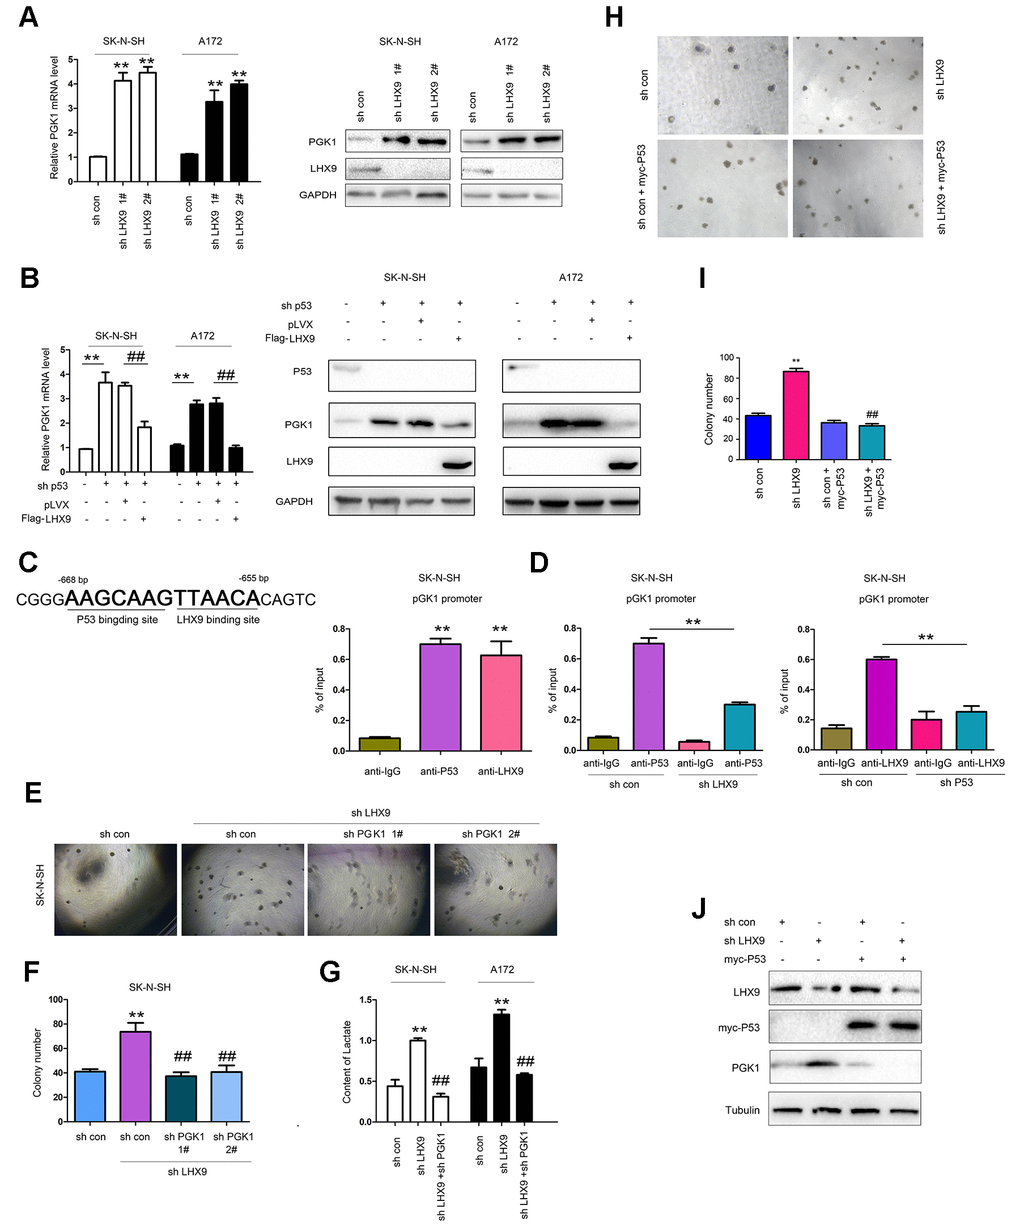 LHX9 inhibited glycolysis by down-regulating PGK1 expression. (A) Interfering with LHX9 expression up-regulated the mRNA level of PGK1. (B) Overexpression of LHX9 inhibited the induction of PGK1 by knockdown of p53. (C) Left: the schematic illustration of the PKG1 promoter with labeled p53 and LHX9 binding sites. Right: Chromosomal immunoprecipitation assay demonstrated that p53 and LHX9 bound to the PGK1 promoter. (D) Chromosomal immunoprecipitation assay demonstrated that down-regulating LHX9 expression inhibited the binding of p53 to the PGK1 promoter, and vice versa. (E, F) Soft agar assay demonstrated that down-regulating the expression of PGK1 abolished the increase in colony formation caused by down-regulation of LHX9. (G) Interfering with LHX9 expression increased the lactic acid content. This increase could be suppressed by interfering with PGK1. (H, I) The effects of P53 restoration on the anchorage-independent growth of SK-N-SH were examined. (J) The effects of P53 restoration on the PGK1 expression of SK-N-SH were examined. ##, PP